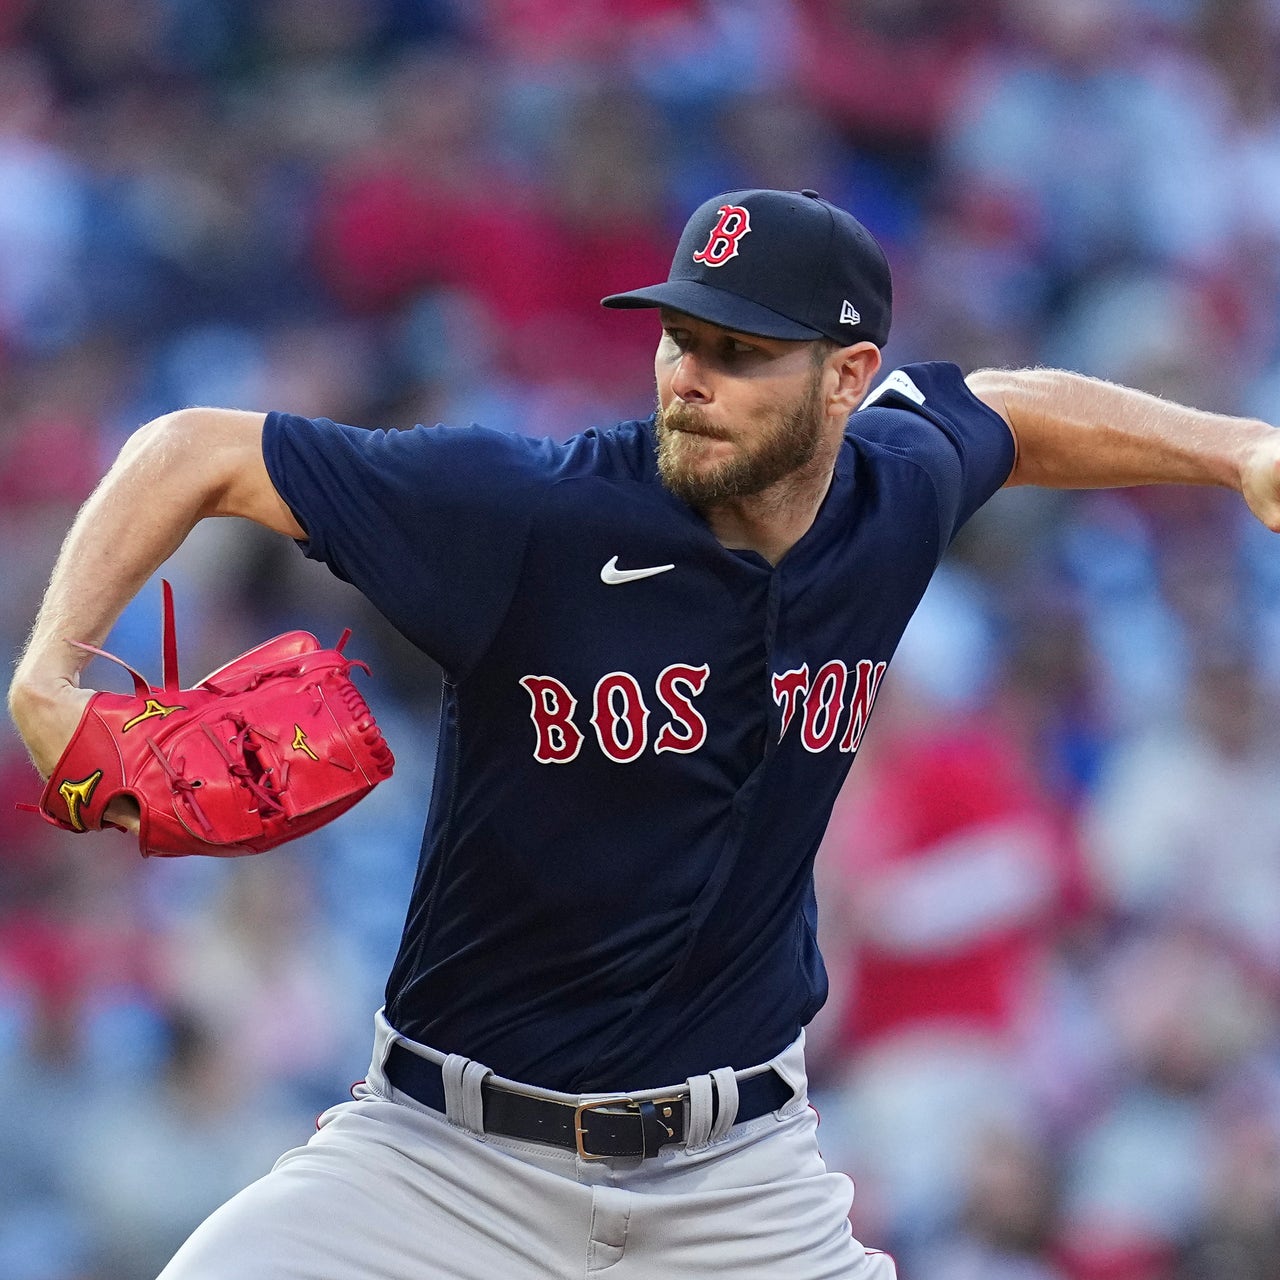 Chris Sale might have his velocity back, which could be huge for